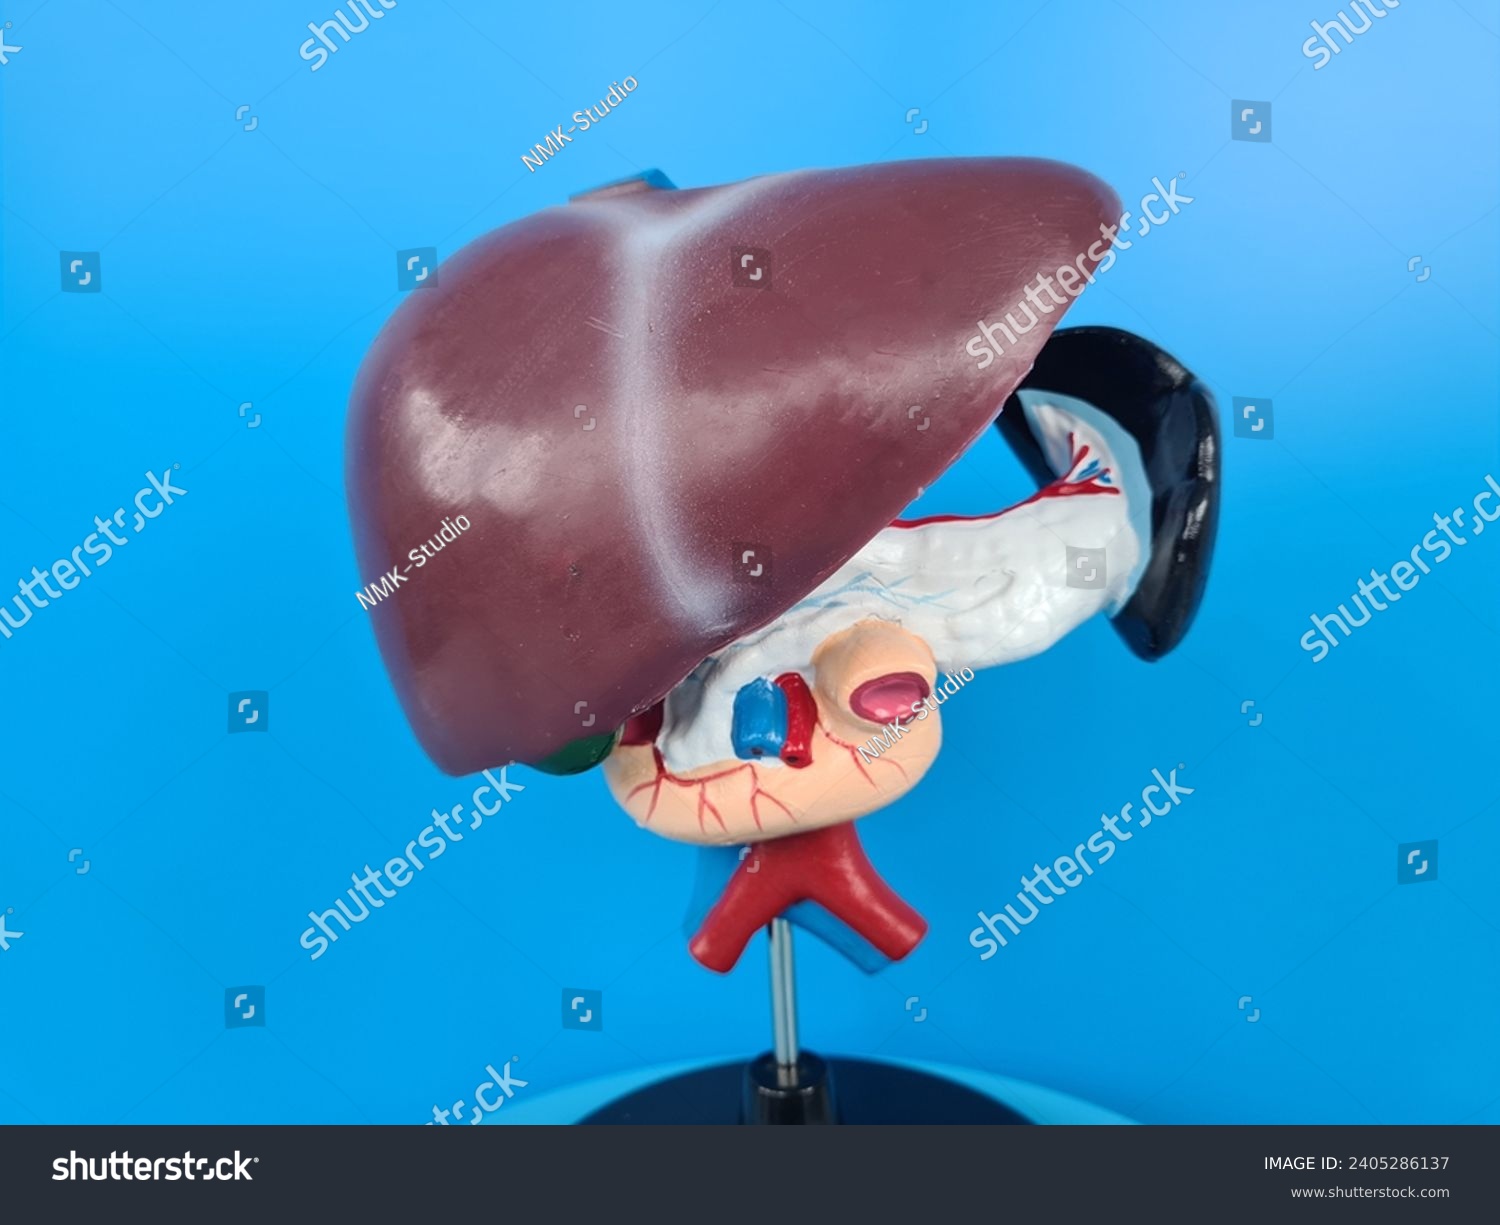 Human liver anatomy closeup. Realistic anatomy structure of liver organ of hepatic system and organ of digestive gallbladder. Human liver model for medicines pharmacy and education #2405286137